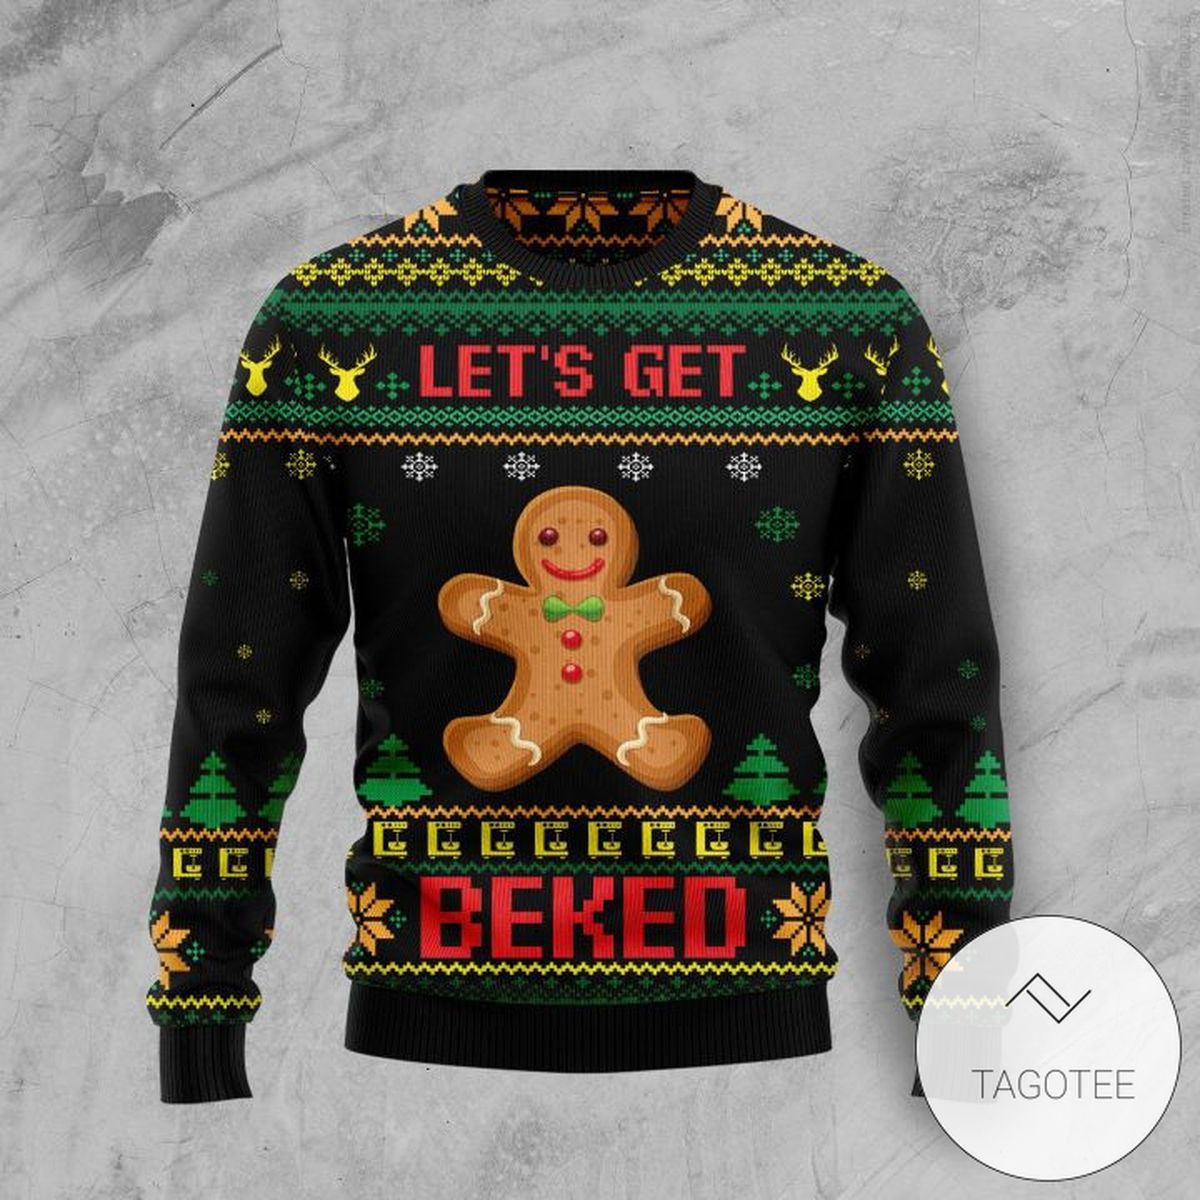 Let's Get Baked Sweatshirt Knitted Ugly Christmas Sweater